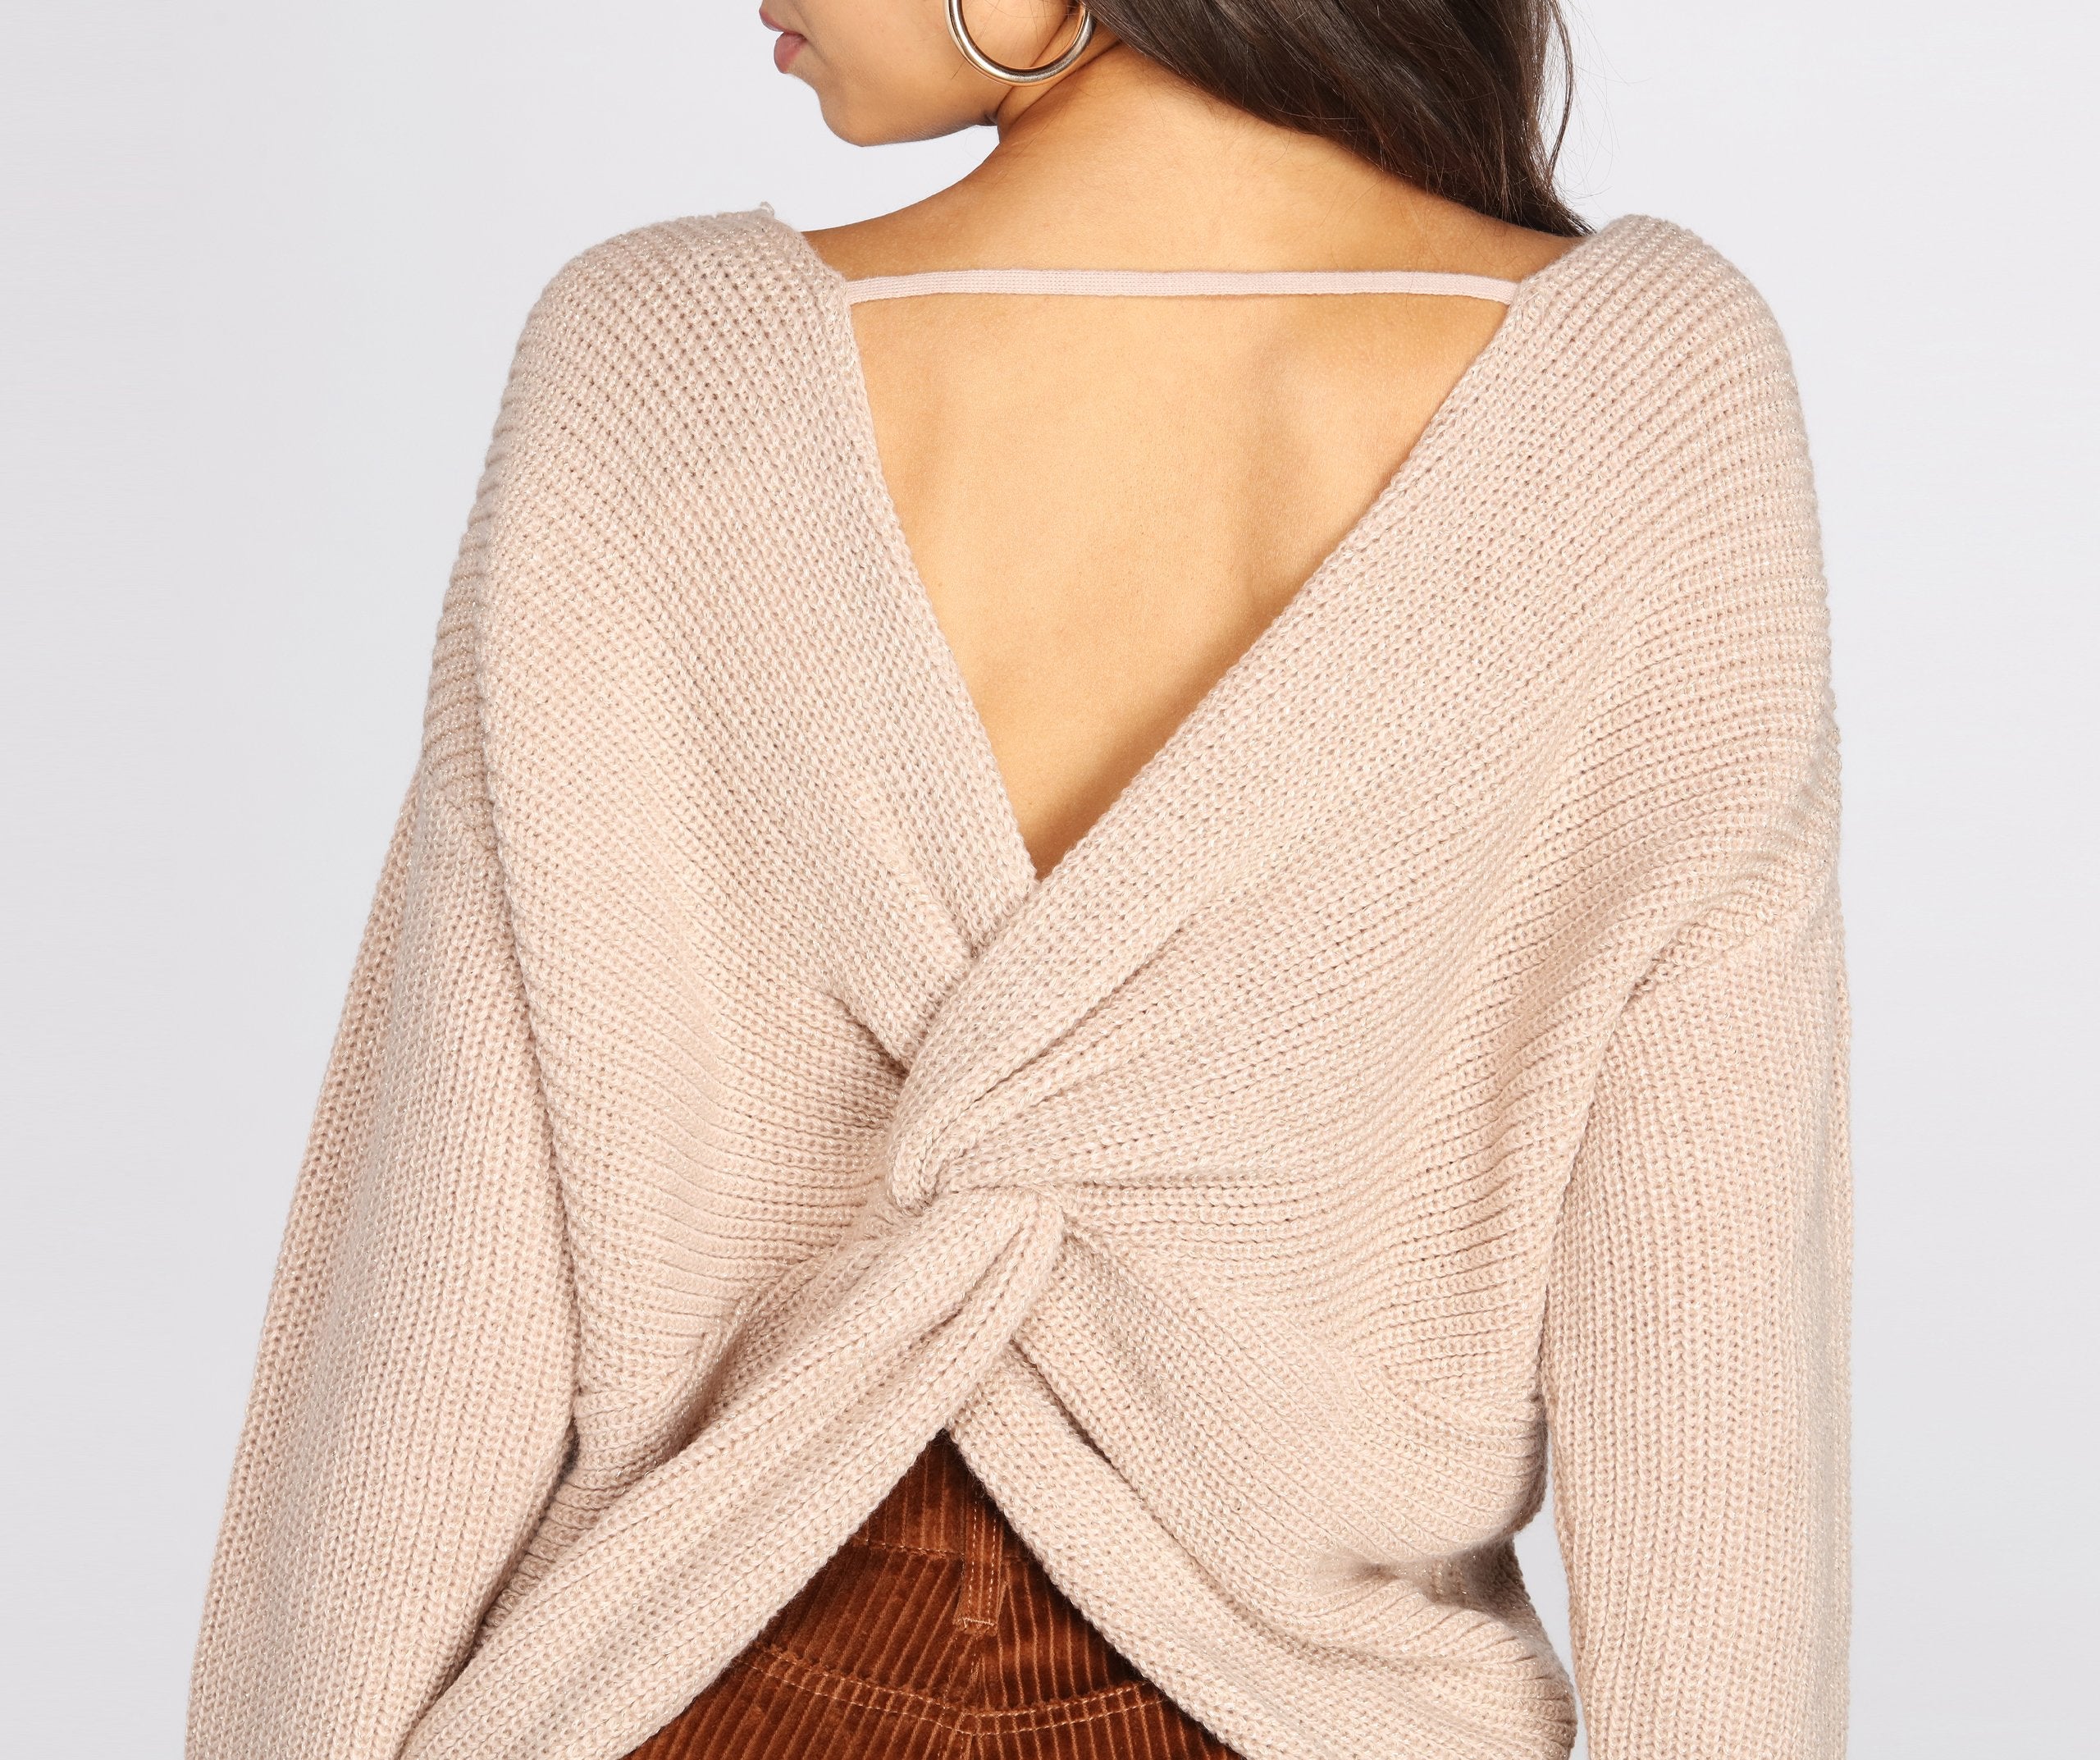 Knot So Innocent Knit Sweater - Lady Occasions